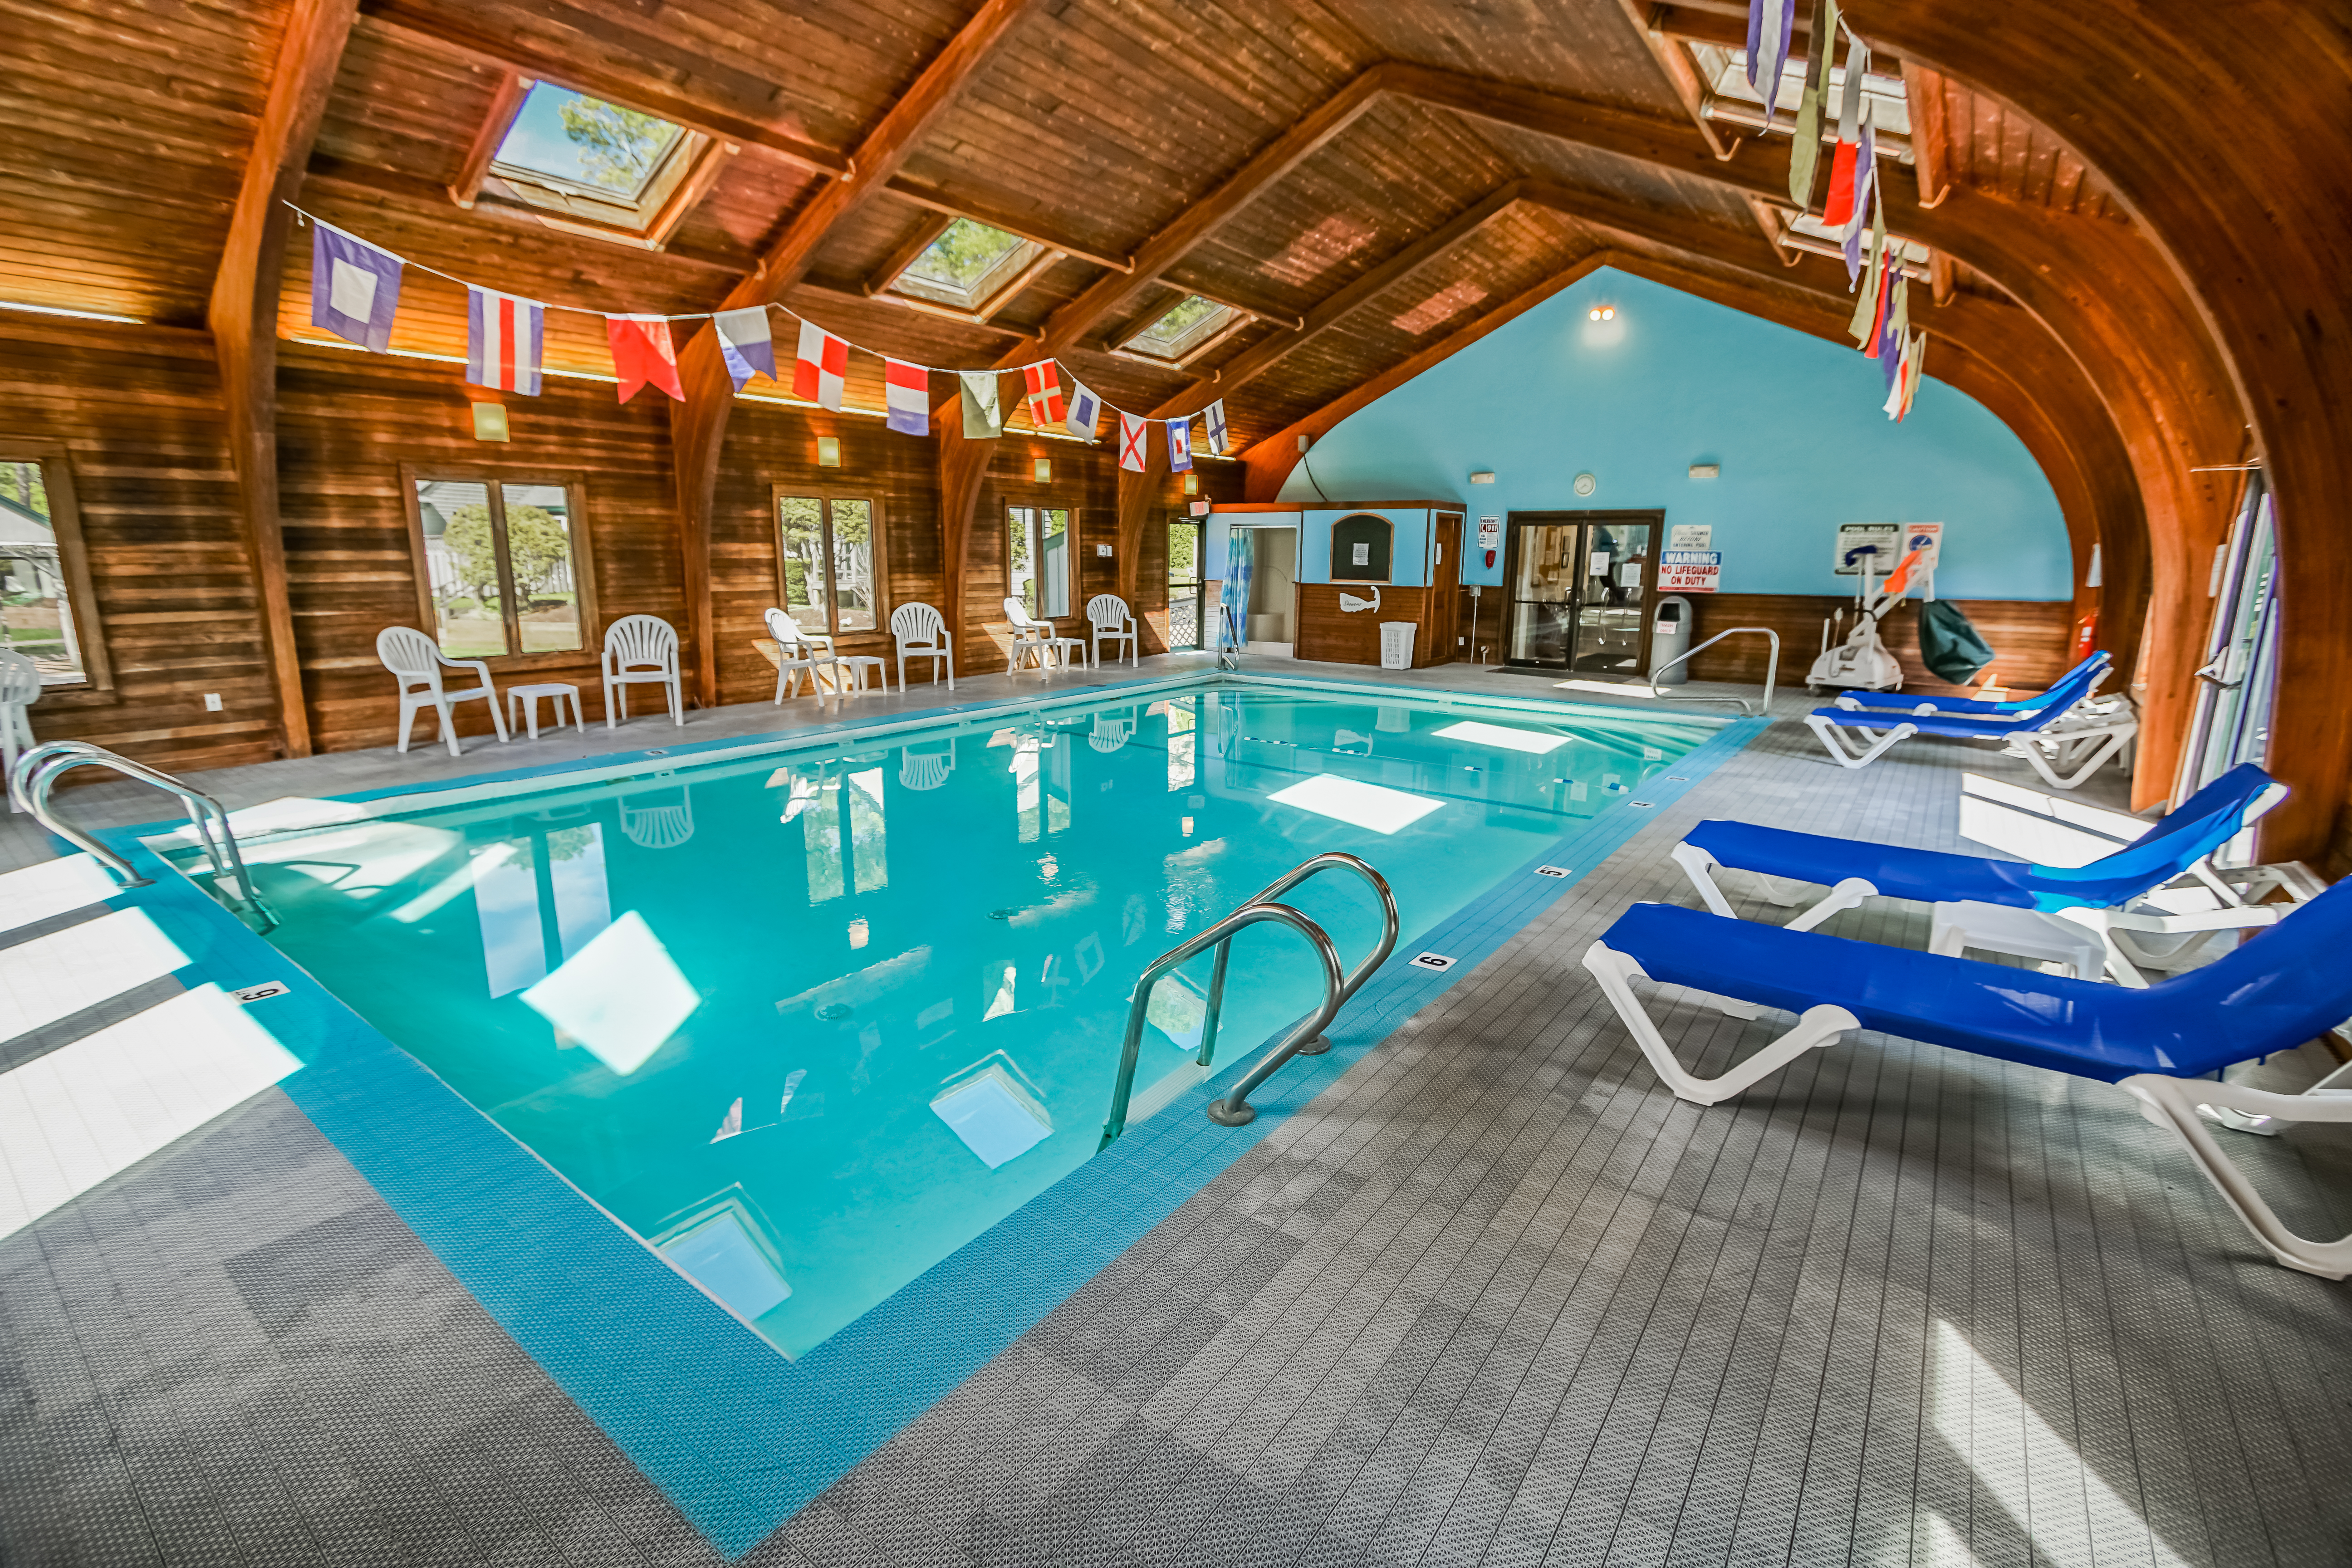 A expansive indoor swimming pool at VRI's Cape Cod Holiday Estates in Massachusetts.